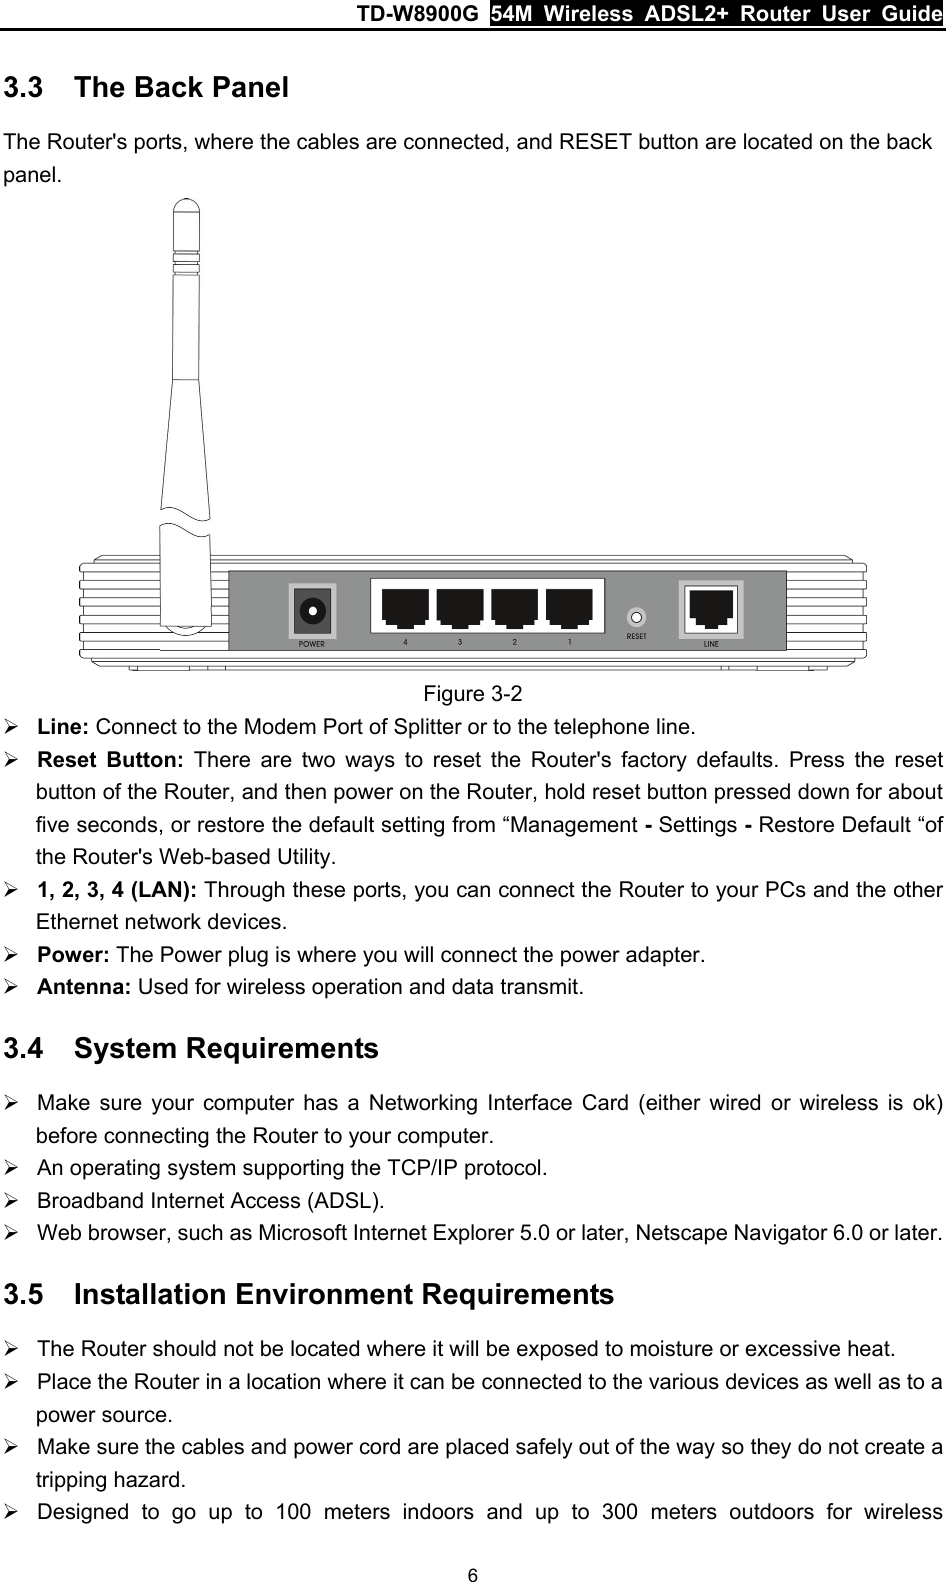 TD-W8900G  54M Wireless ADSL2+ Router User Guide 6 3.3  The Back Panel The Router&apos;s ports, where the cables are connected, and RESET button are located on the back panel.  Figure 3-2 ¾ Line: Connect to the Modem Port of Splitter or to the telephone line. ¾ Reset Button: There are two ways to reset the Router&apos;s factory defaults. Press the reset button of the Router, and then power on the Router, hold reset button pressed down for about five seconds, or restore the default setting from “Management - Settings - Restore Default “of the Router&apos;s Web-based Utility. ¾ 1, 2, 3, 4 (LAN): Through these ports, you can connect the Router to your PCs and the other Ethernet network devices. ¾ Power: The Power plug is where you will connect the power adapter. ¾ Antenna: Used for wireless operation and data transmit. 3.4  System Requirements ¾  Make sure your computer has a Networking Interface Card (either wired or wireless is ok) before connecting the Router to your computer. ¾  An operating system supporting the TCP/IP protocol. ¾  Broadband Internet Access (ADSL). ¾  Web browser, such as Microsoft Internet Explorer 5.0 or later, Netscape Navigator 6.0 or later. 3.5  Installation Environment Requirements ¾  The Router should not be located where it will be exposed to moisture or excessive heat. ¾  Place the Router in a location where it can be connected to the various devices as well as to a power source. ¾  Make sure the cables and power cord are placed safely out of the way so they do not create a tripping hazard. ¾  Designed to go up to 100 meters indoors and up to 300 meters outdoors for wireless 